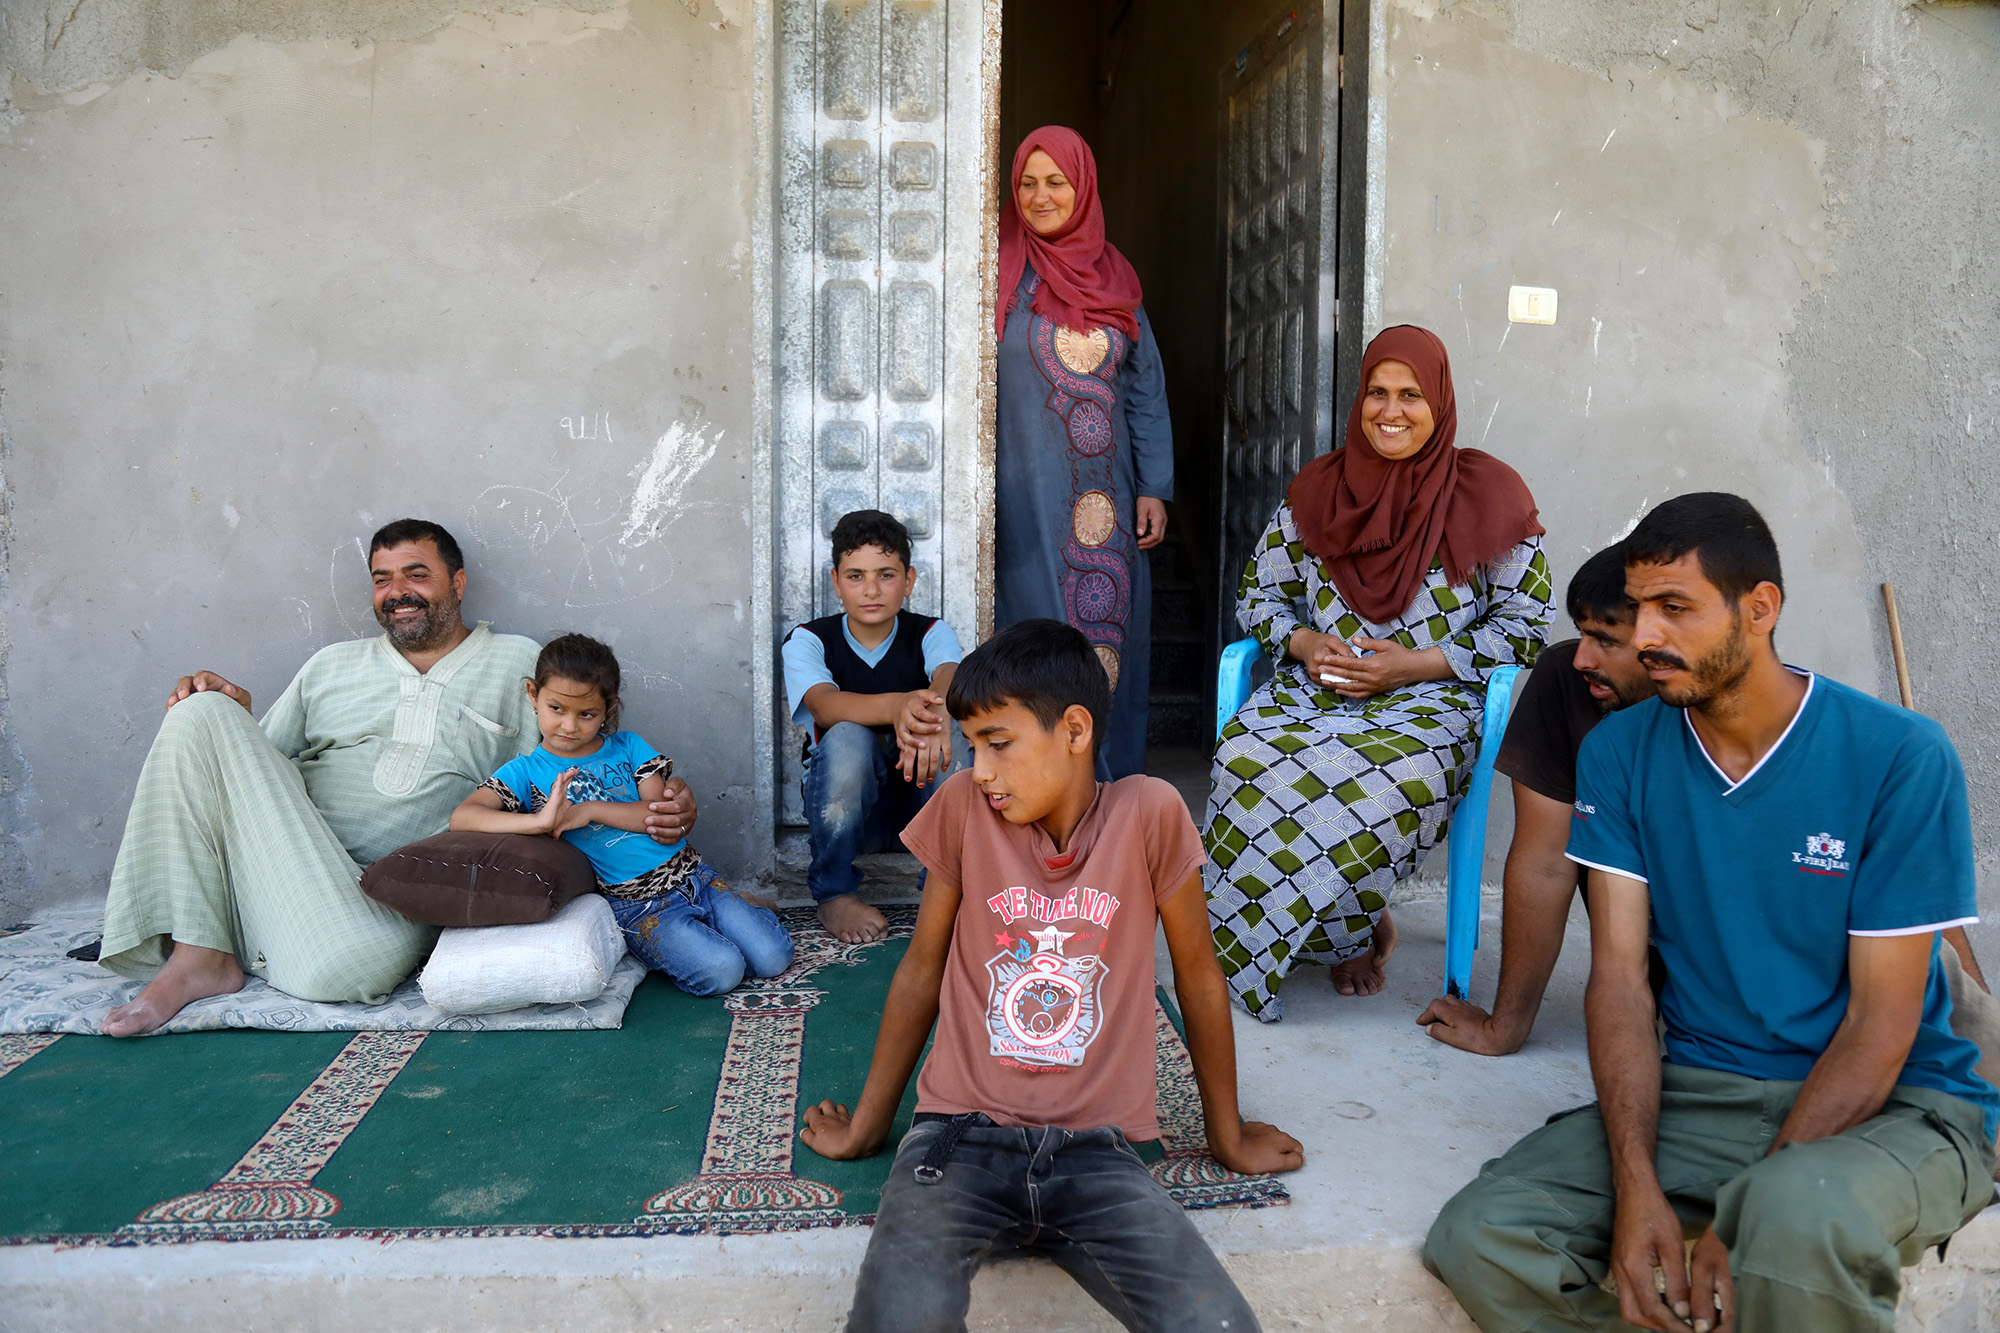 The Al Adham family, who benefit from an Anera greenhouse, sit in front of their family home in Beit Lahia, Gaza.